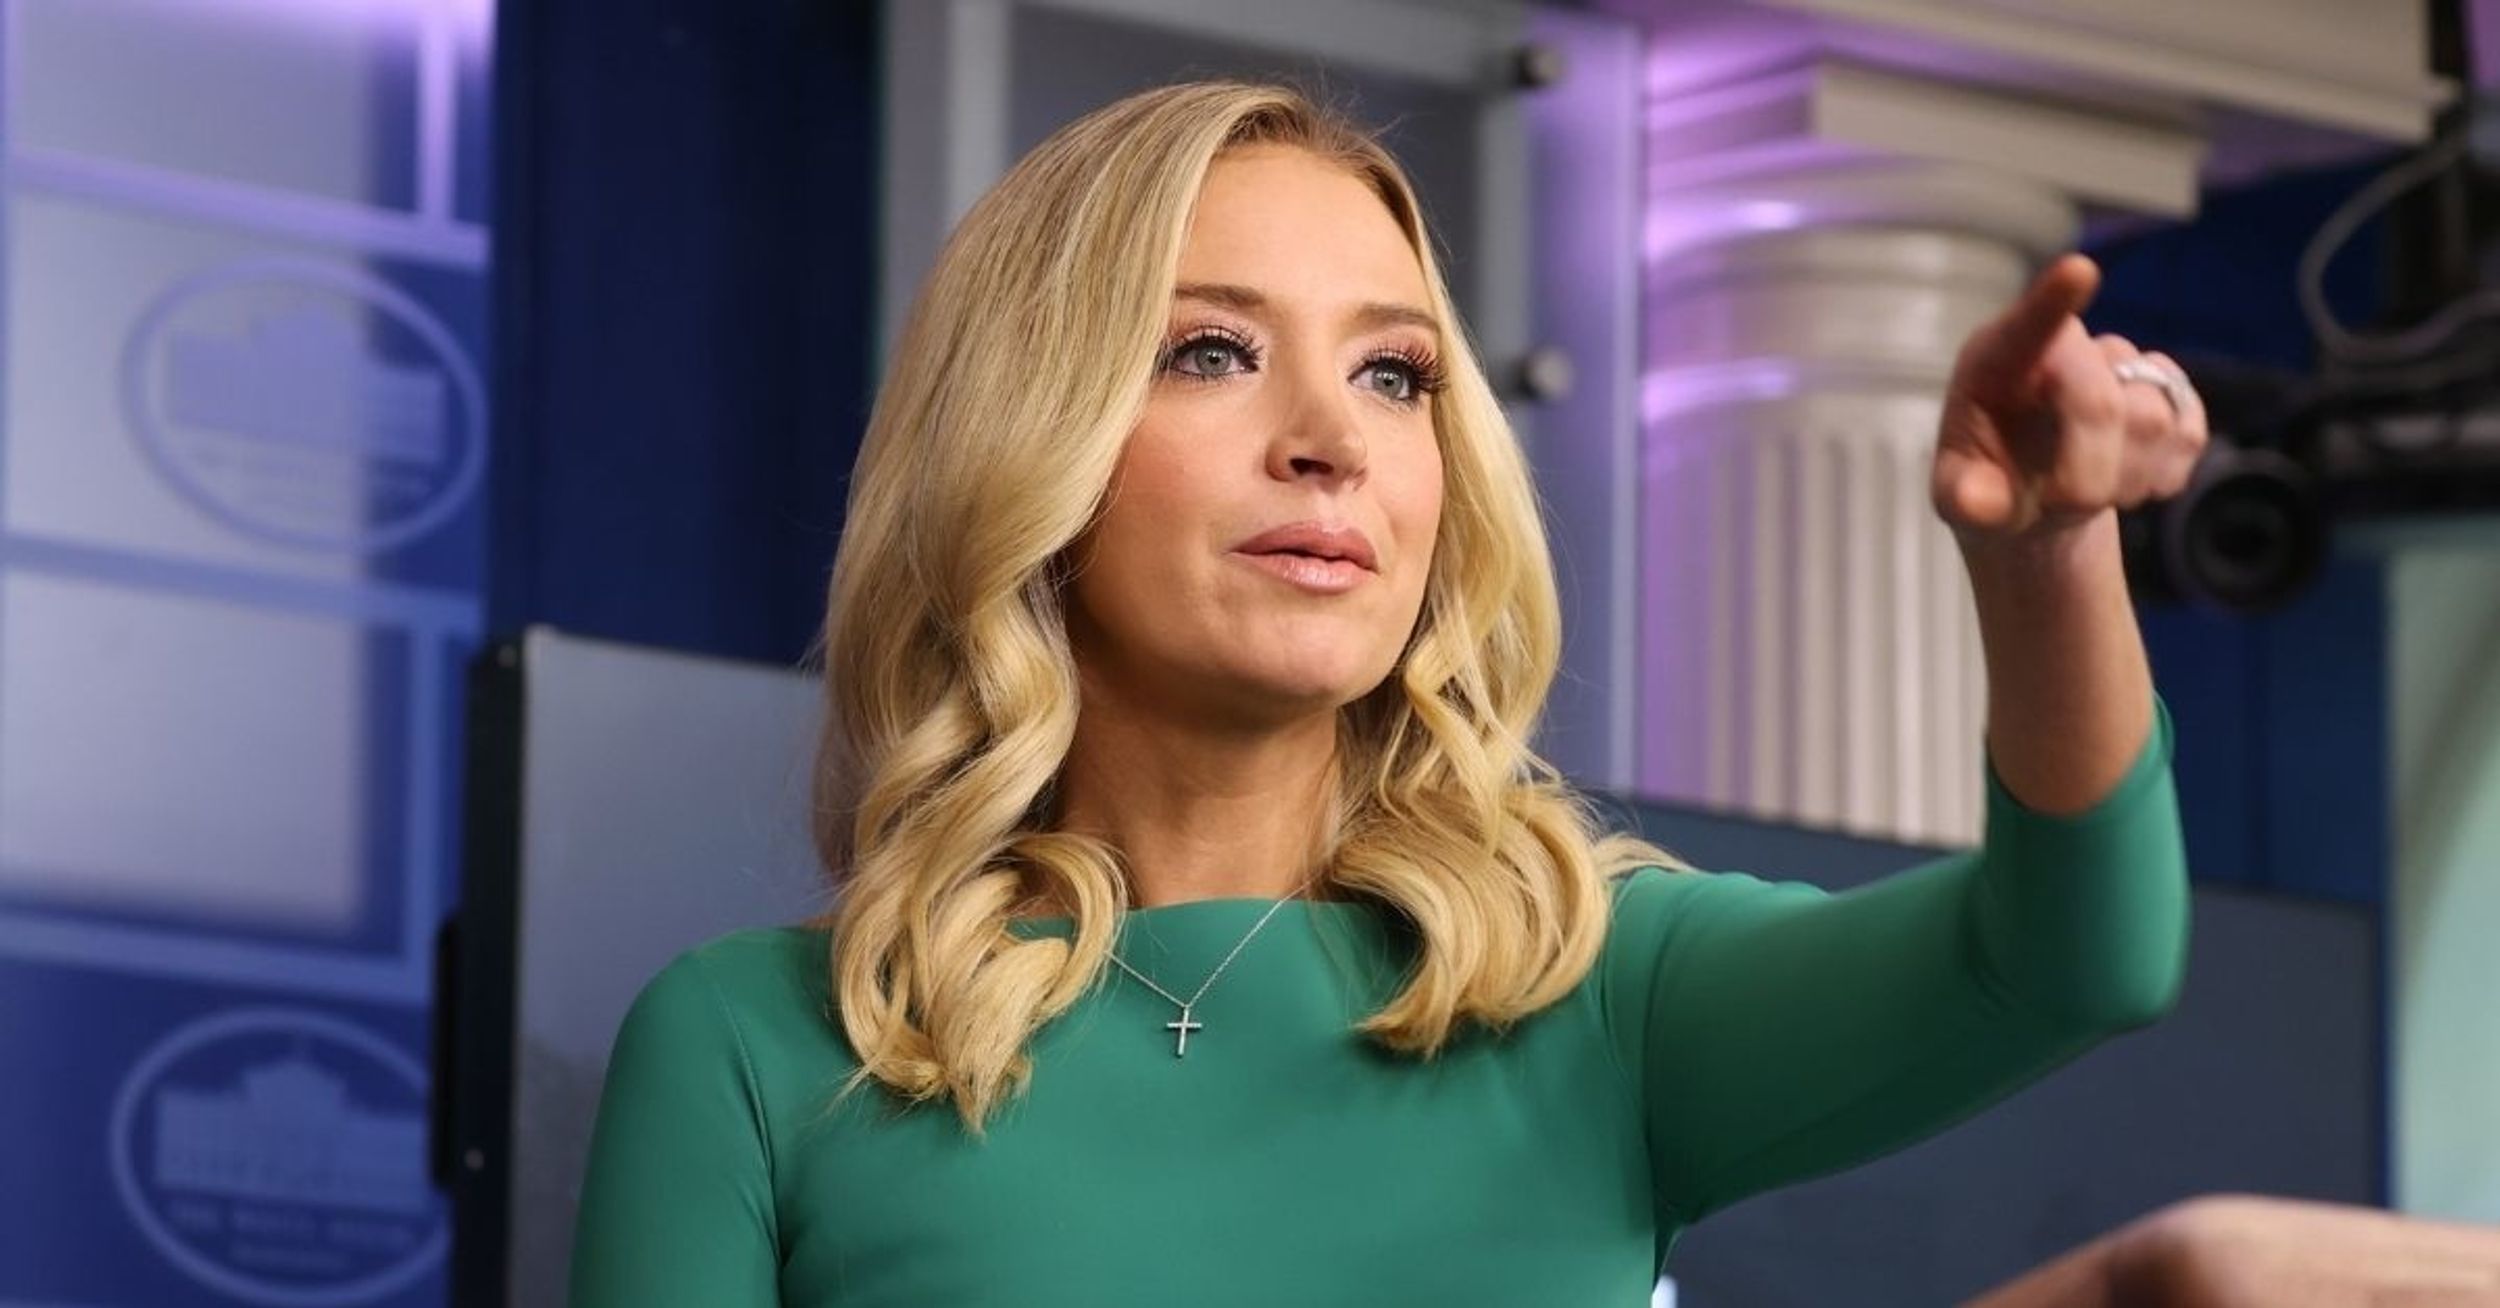 Kayleigh McEnany Dragged For Blatant Lie While Complaining About Biden's All-Female Press Team